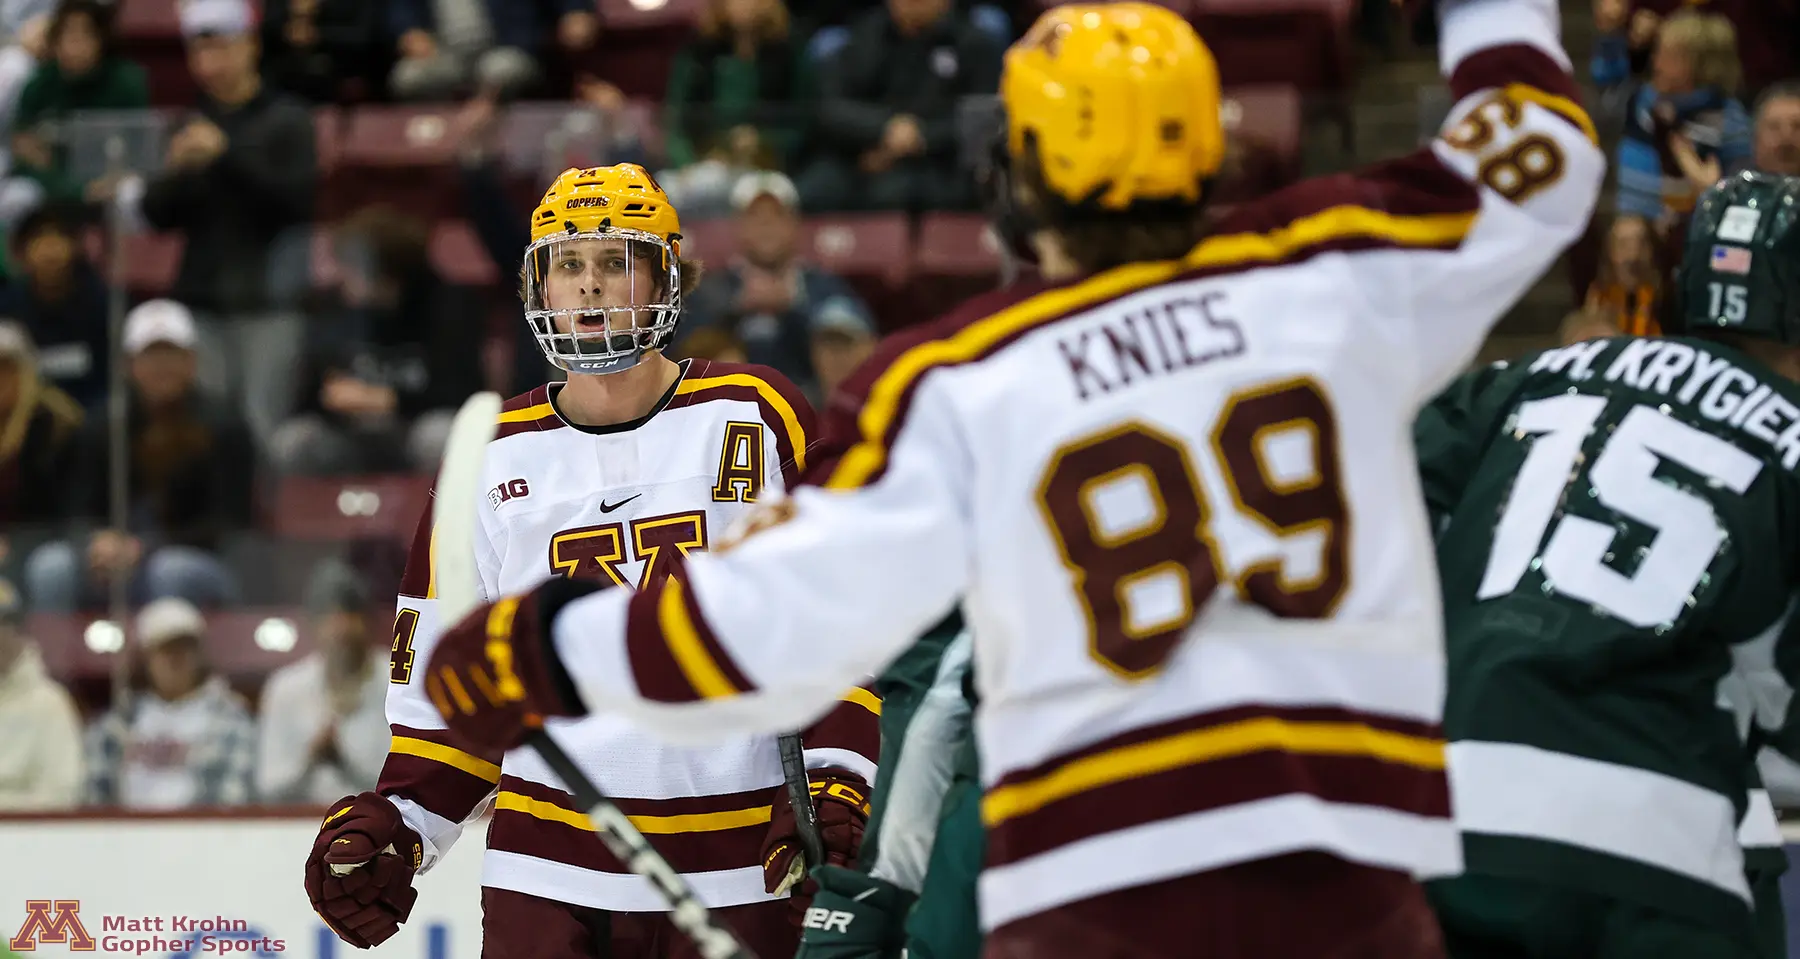 Nelson with the Gopher's first goal. Photo by Matt Krohn of Gopher Sports.